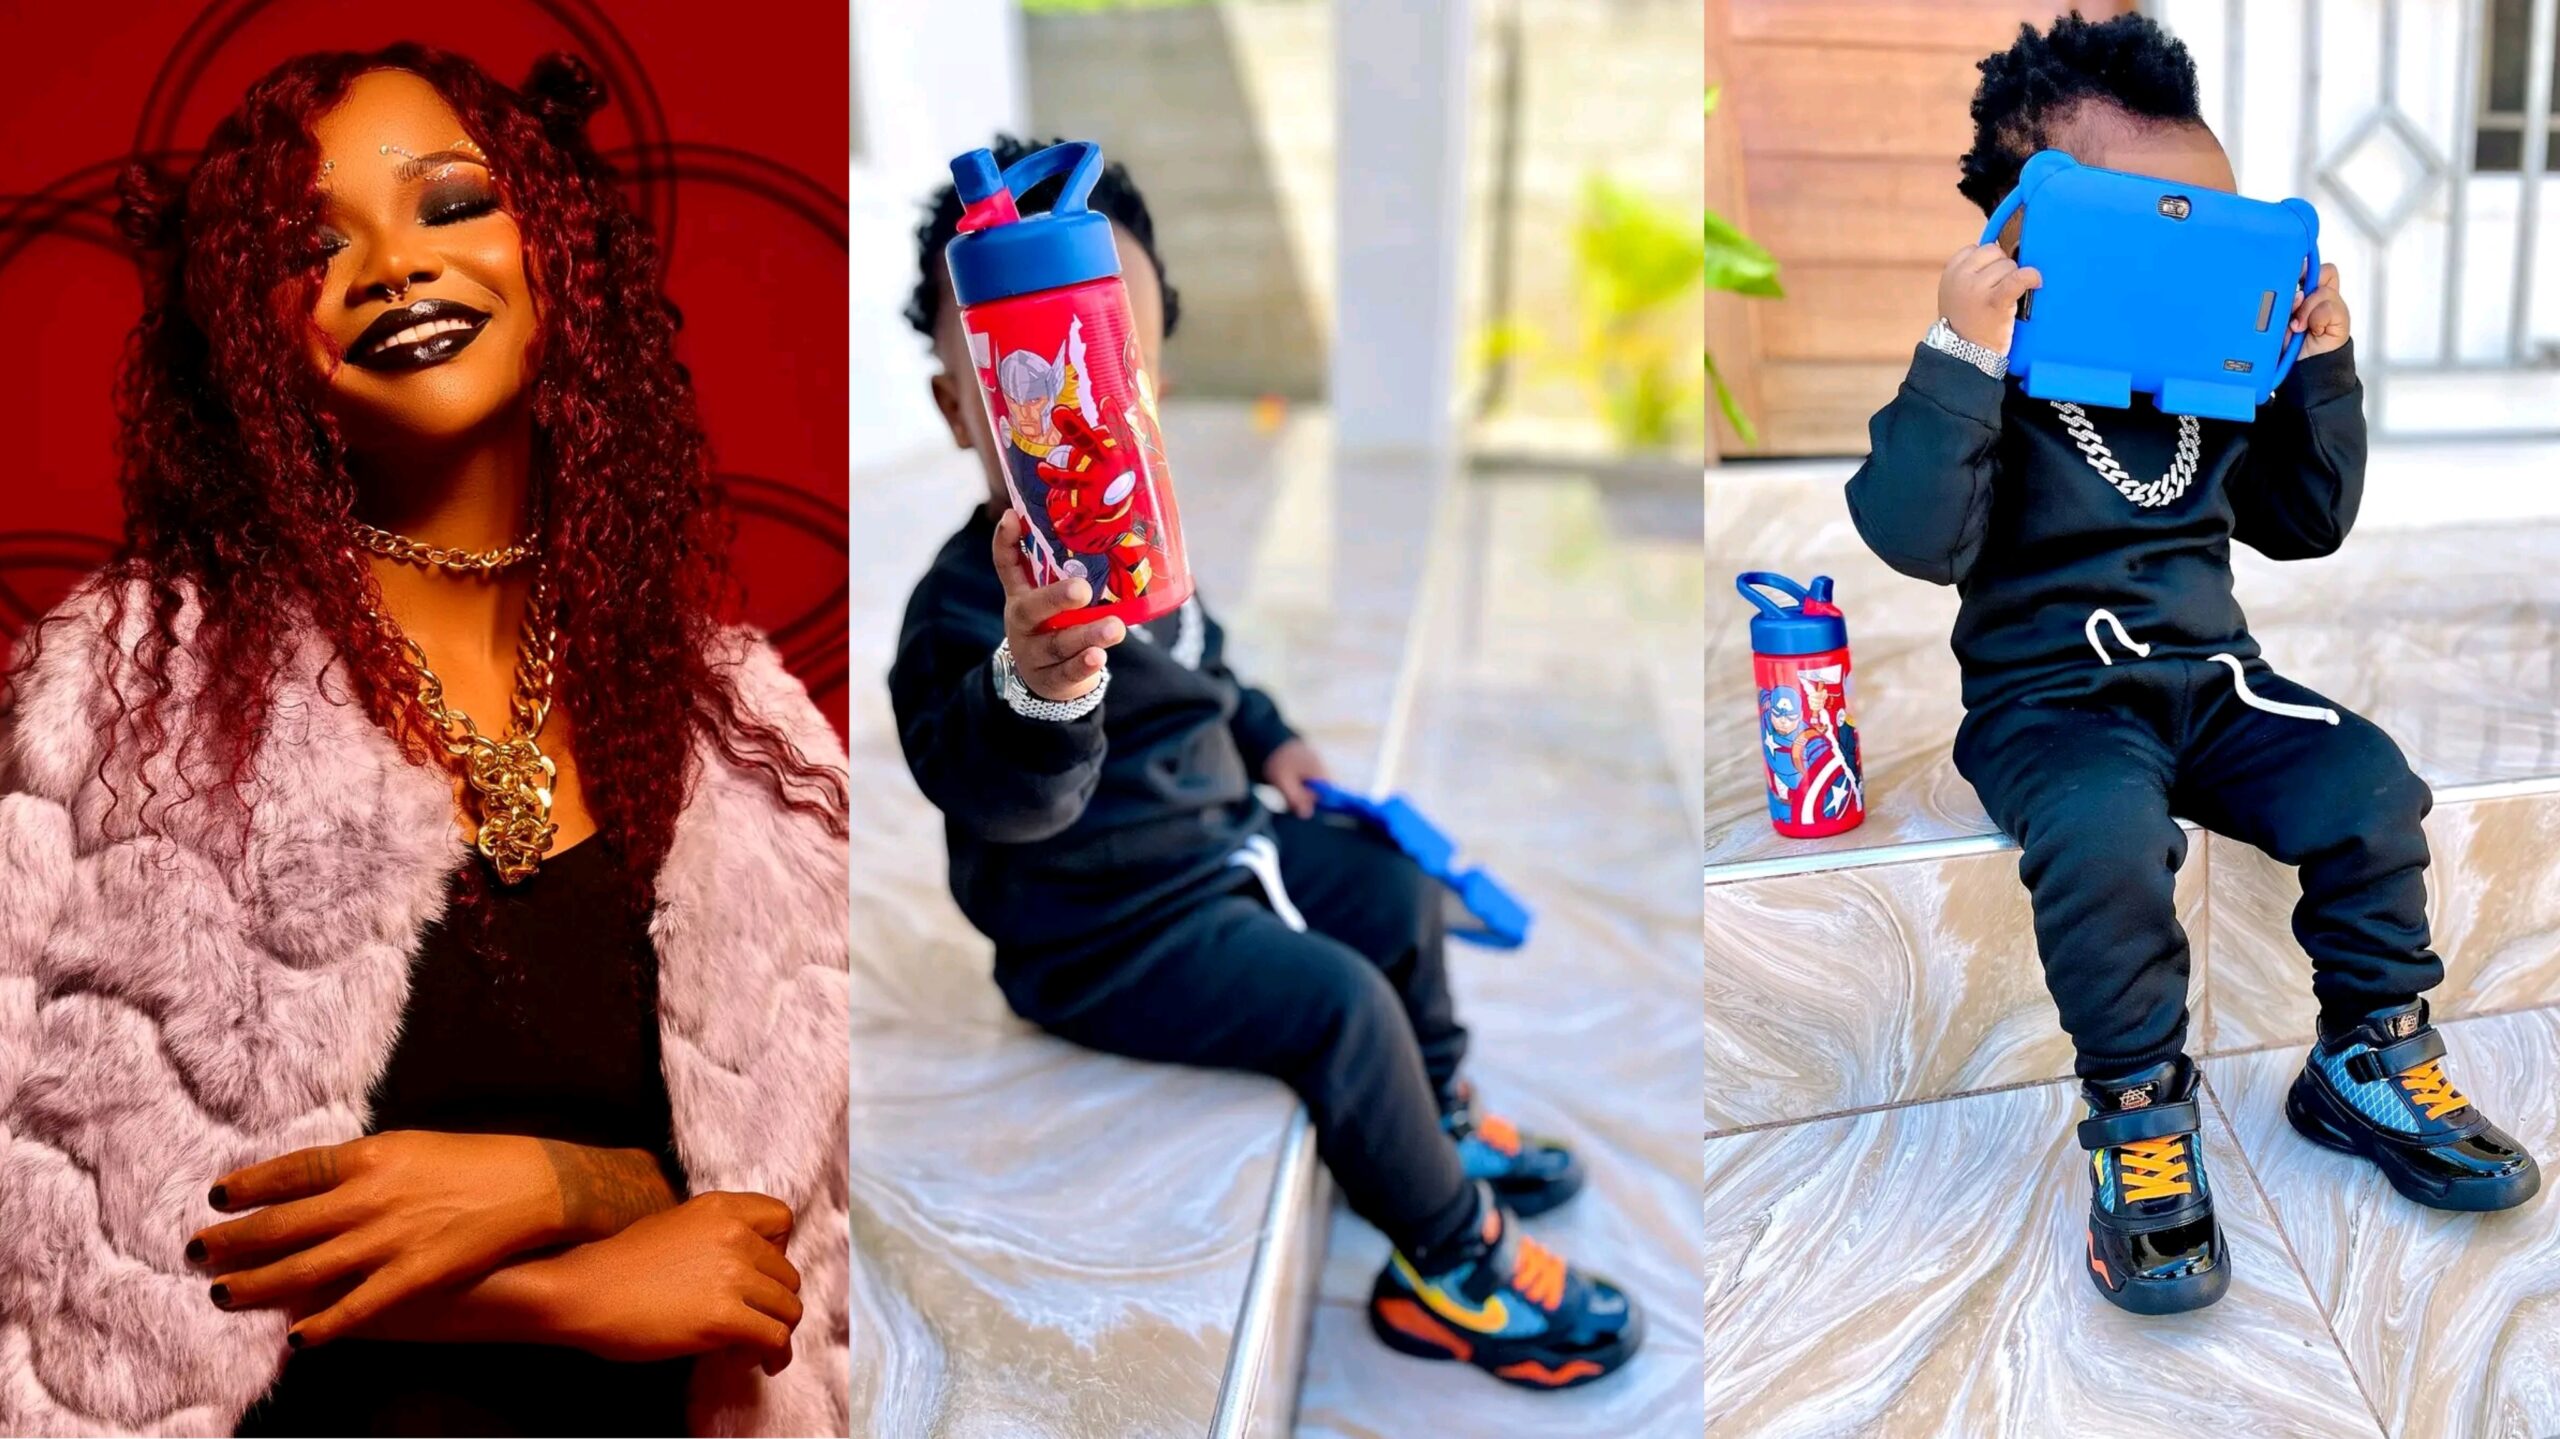 Rosa Ree Opens An Instagram Account For Her Little Son